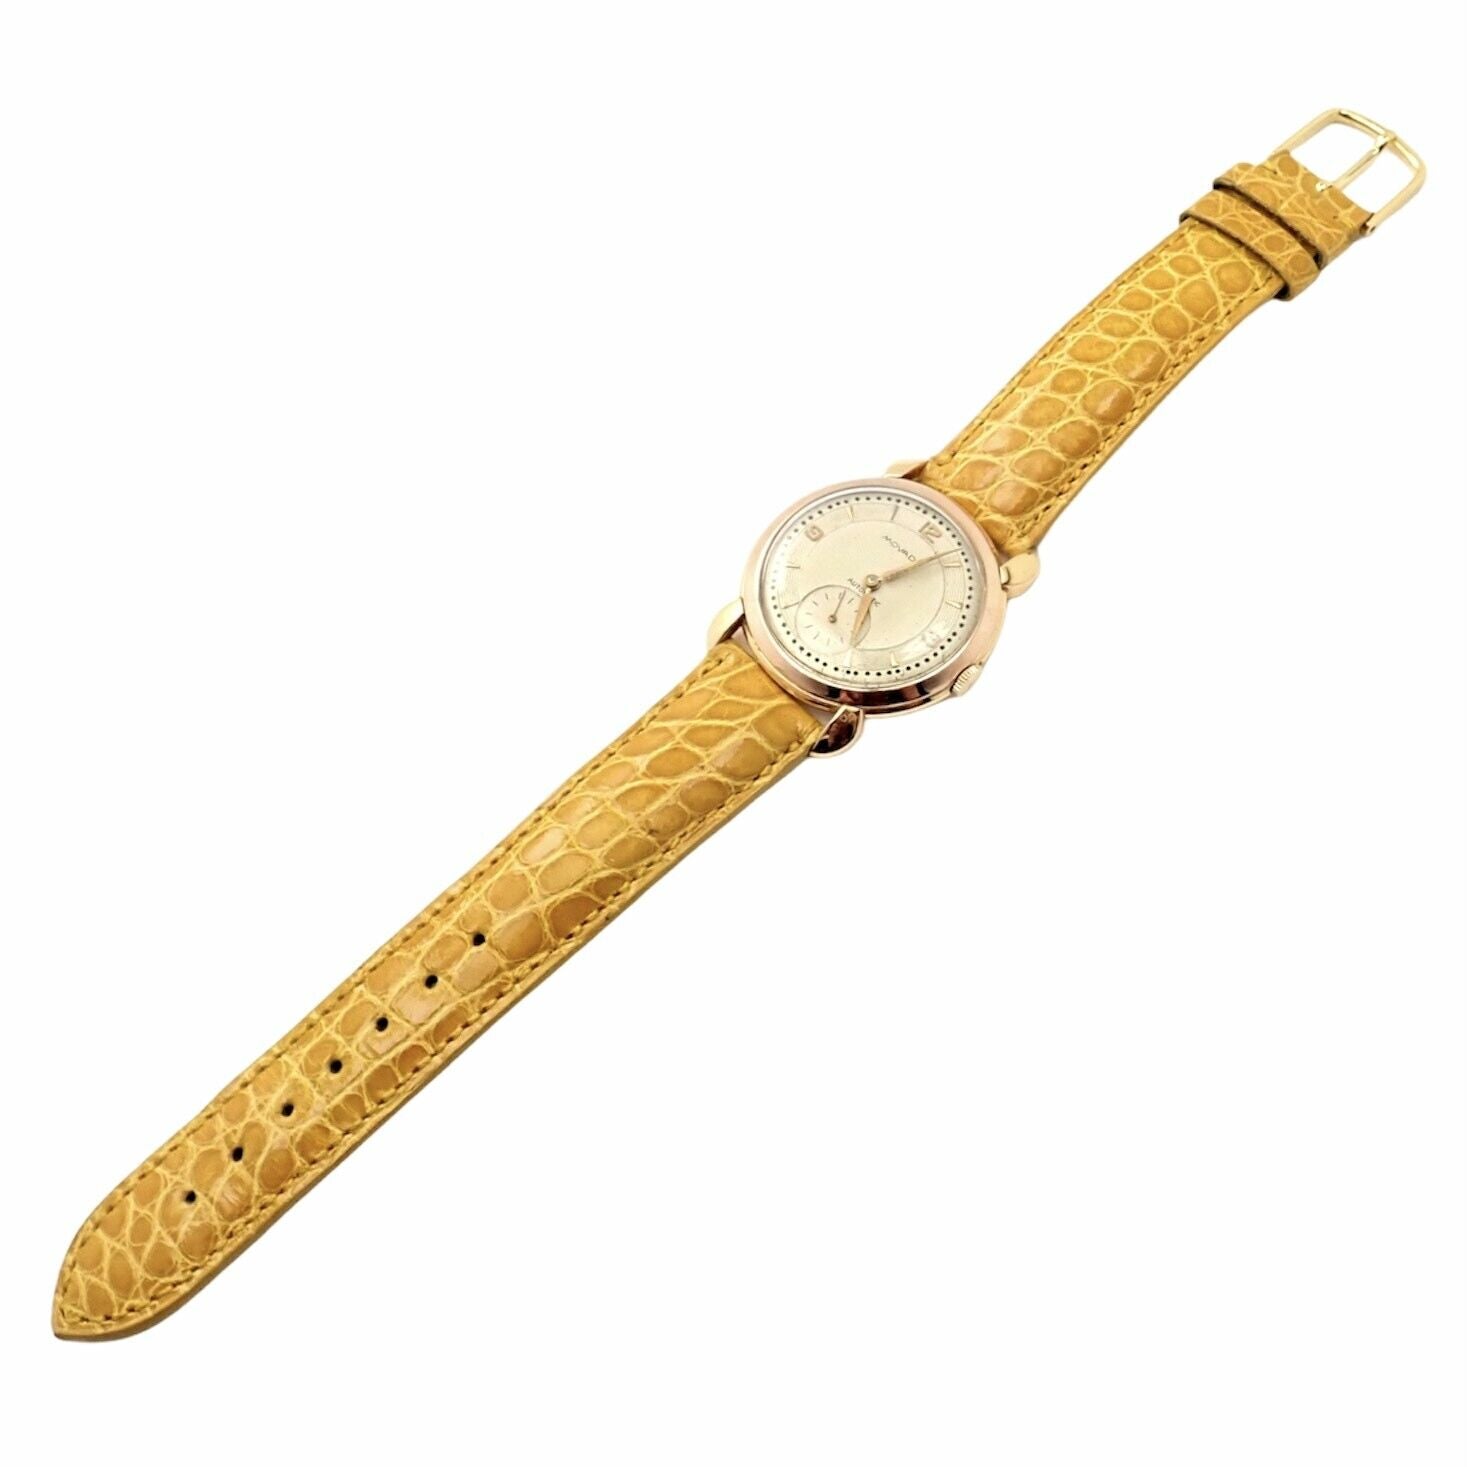 Movado Jewelry & Watches:Watches, Parts & Accessories:Watches:Wristwatches Movado 18k Yellow Gold Automatic Bumper Yellow Alligator Band Watch R8405